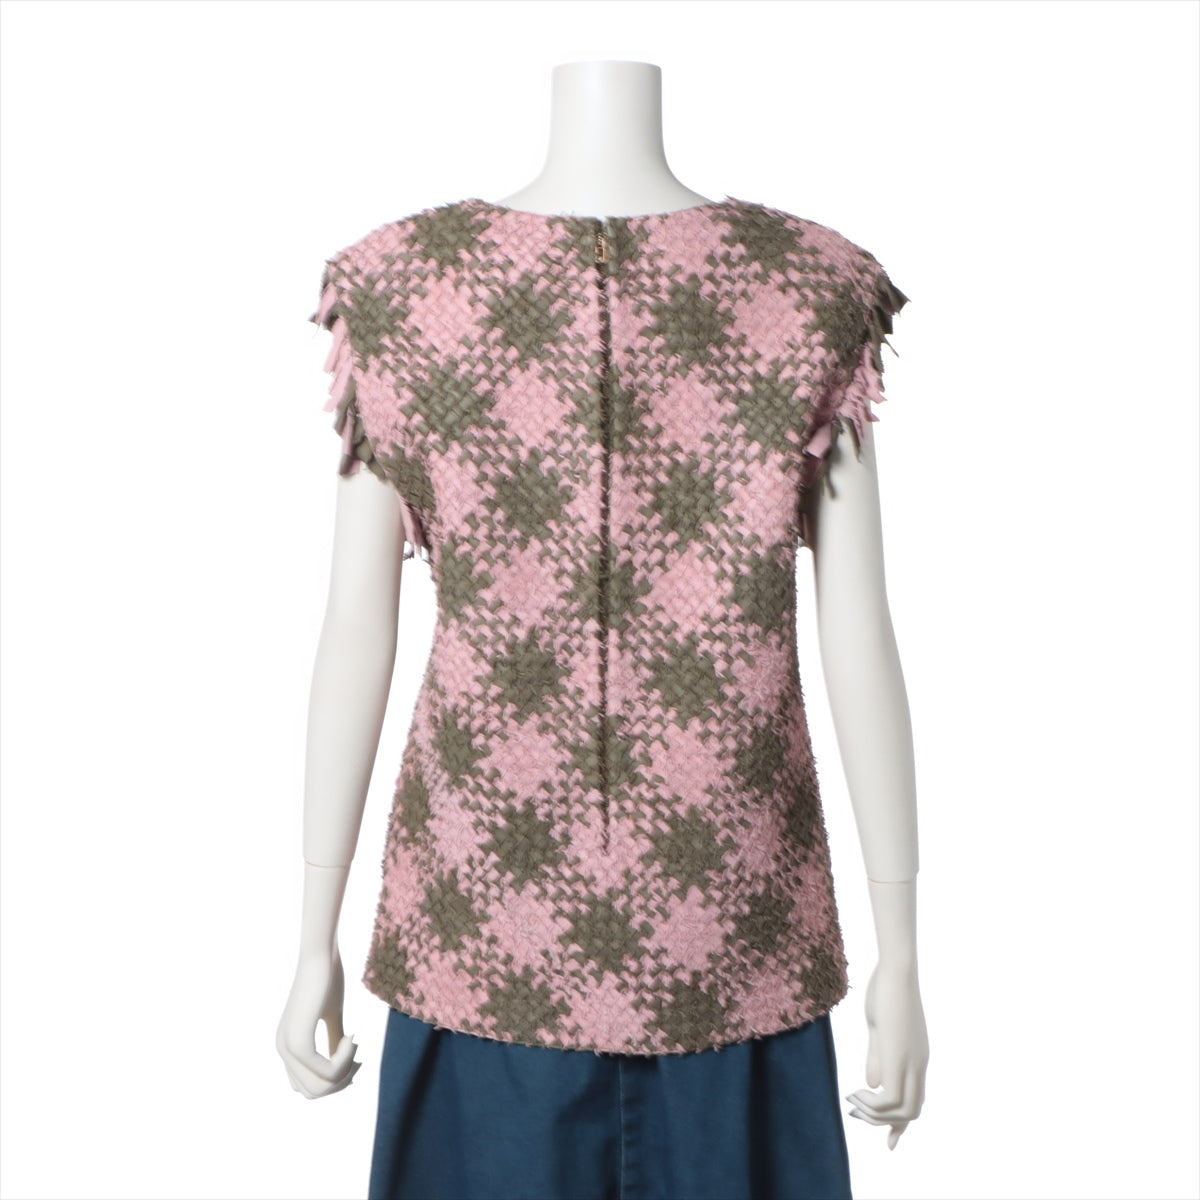 Chanel P55 Ram leather Blouse 34 Ladies' Pink x green  P55564